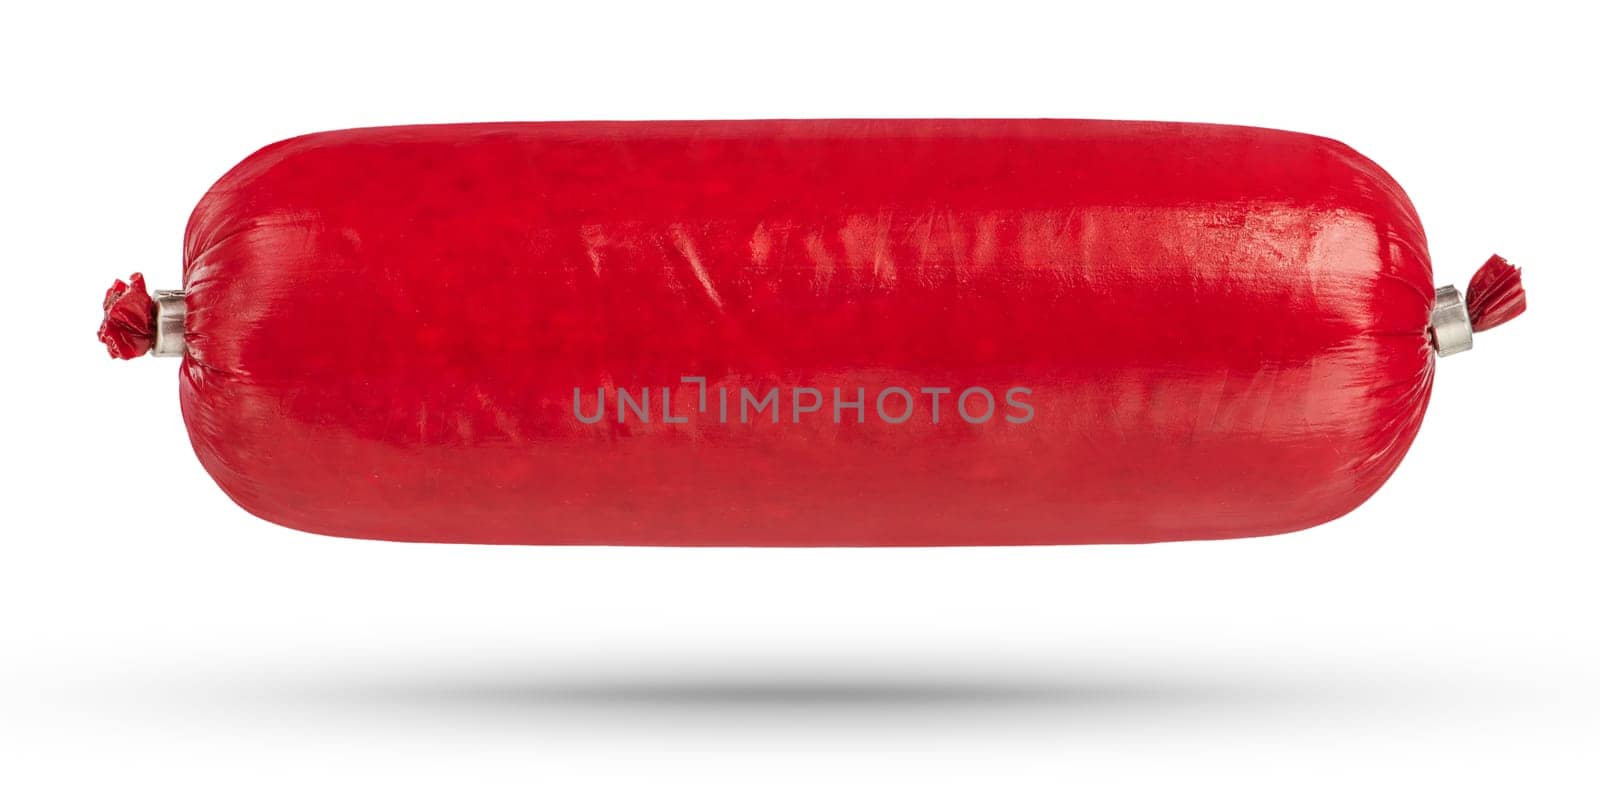 Packed salami sausage close-up on a white isolated background. The sausage hangs or falls, casting a shadow. Salami is packed in a red protective film. by SERSOL